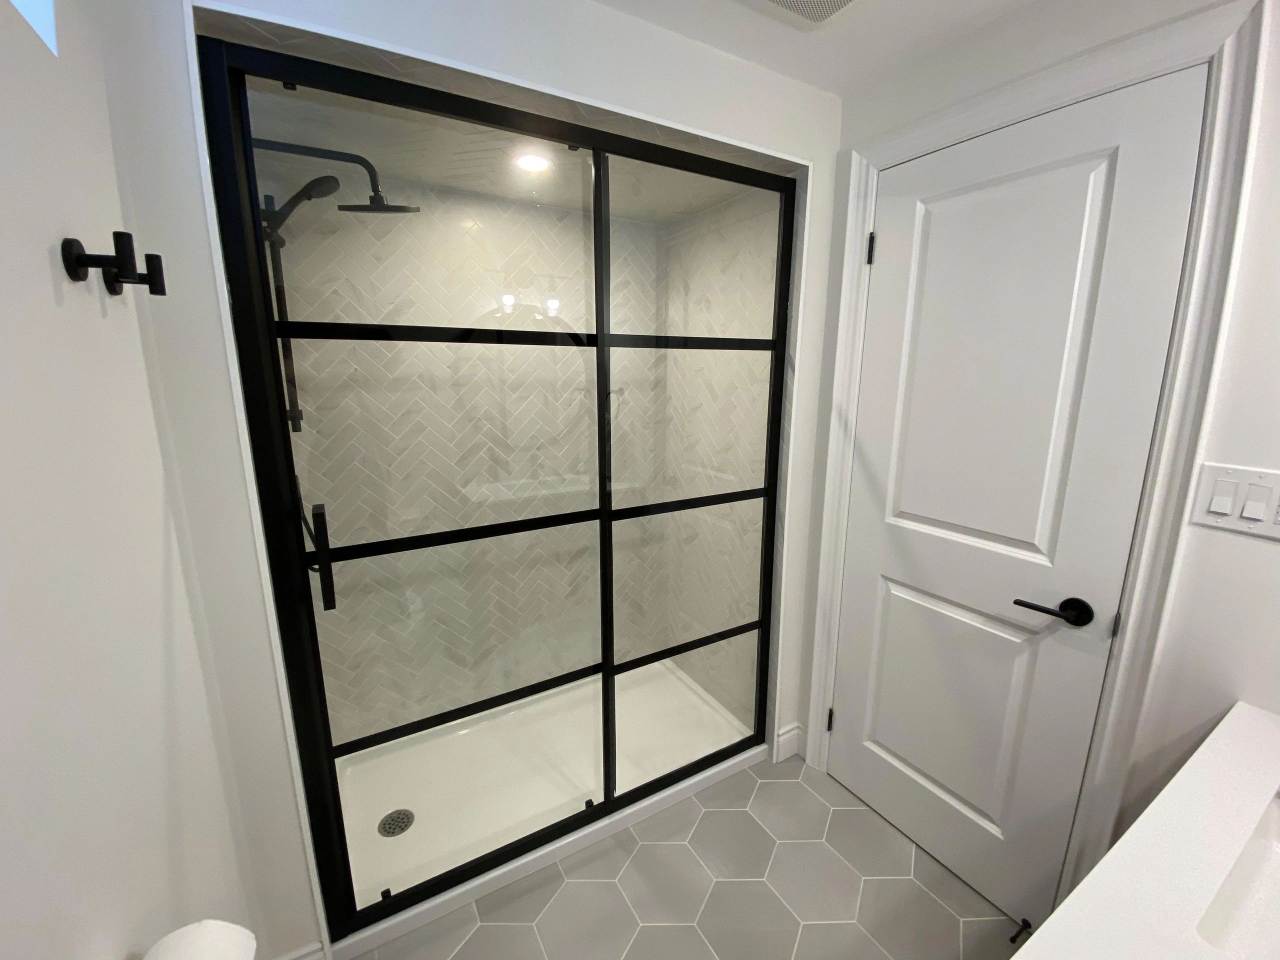 A bathroom with a shower and tiled floor